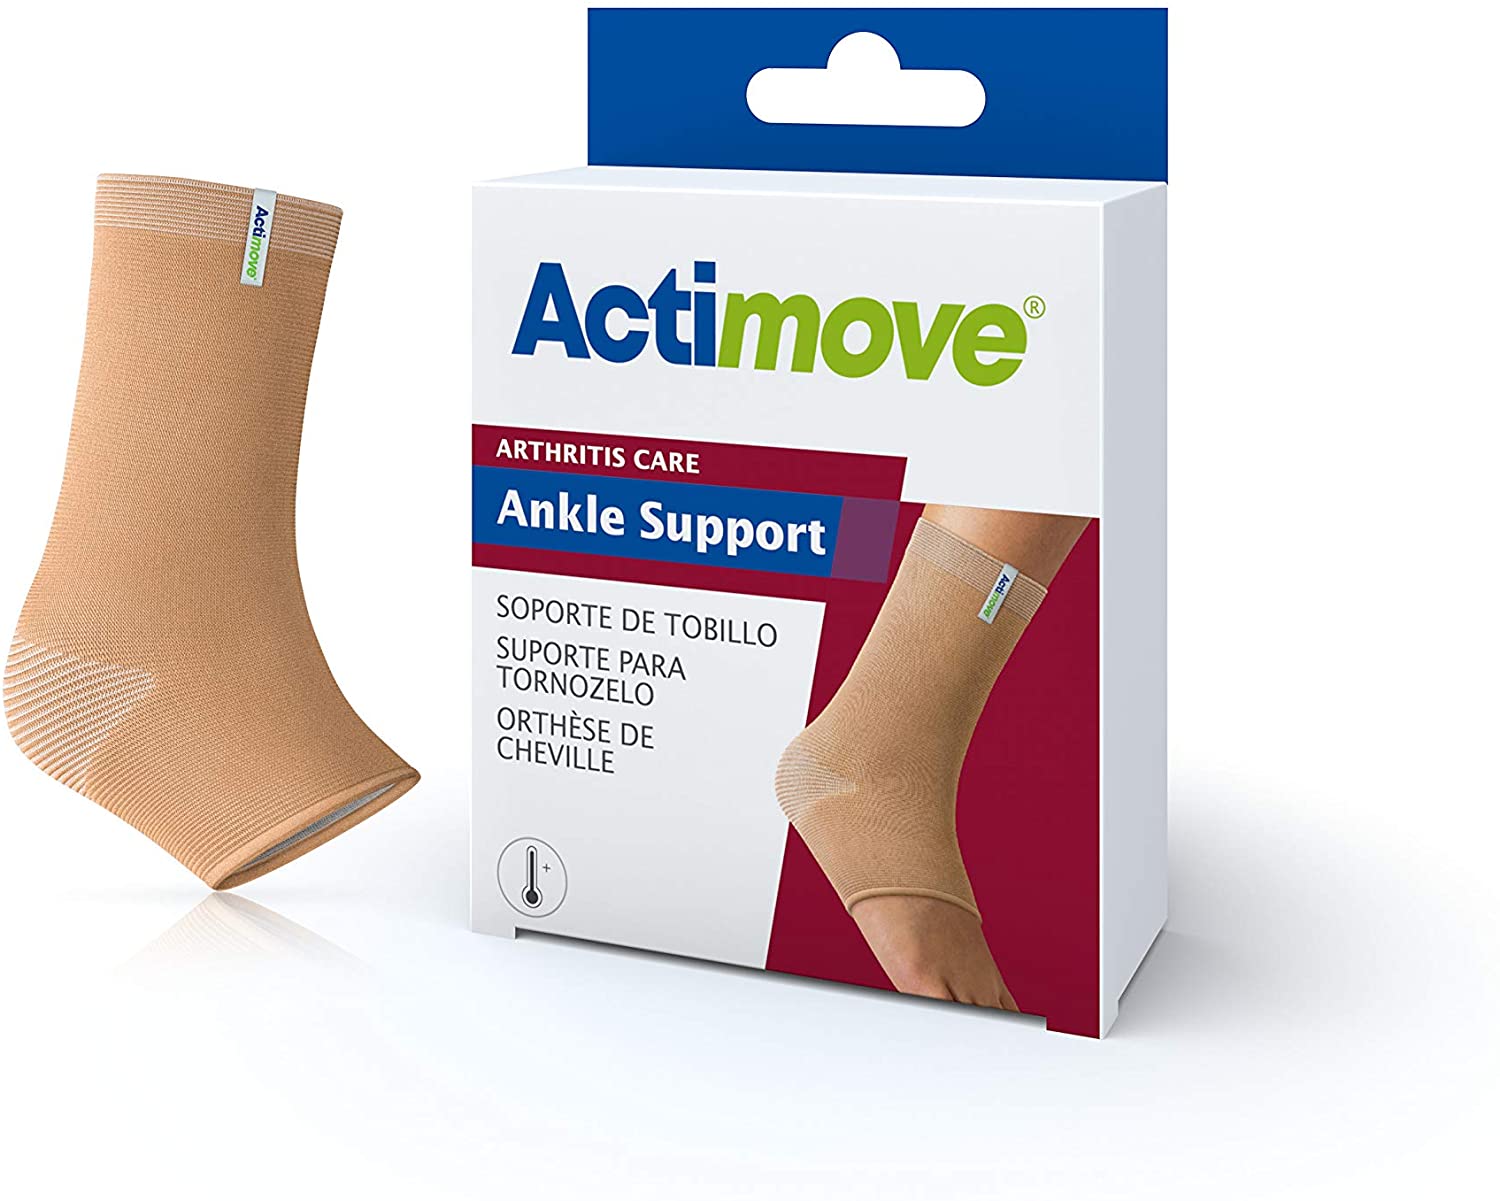 Actimove Arthritis Pain Relief Support, Ankle, Sm, Beige - Ea/1